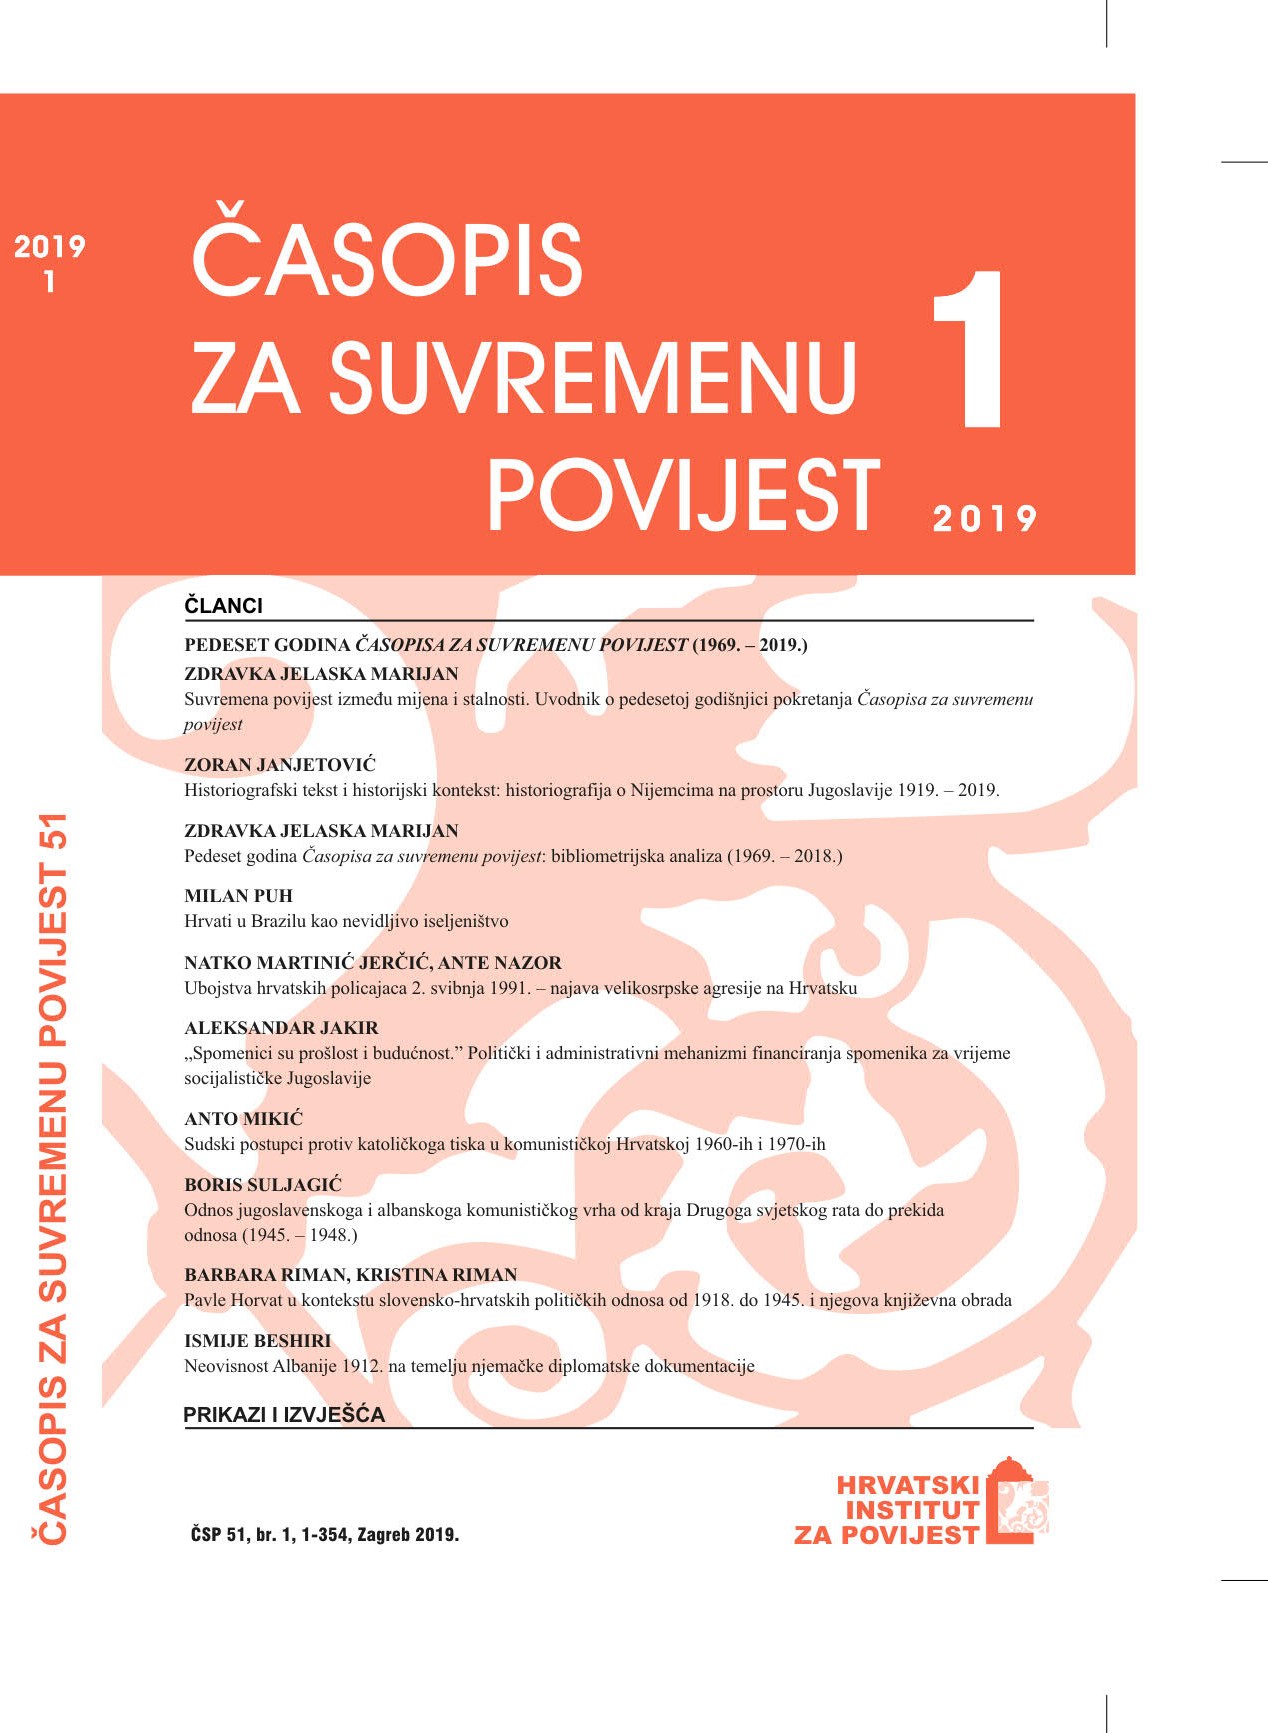 Pavle Horvat in the Context of Slovenian-Croatian Political Relations from 1918 to 1945 and his Literary Treatment Cover Image